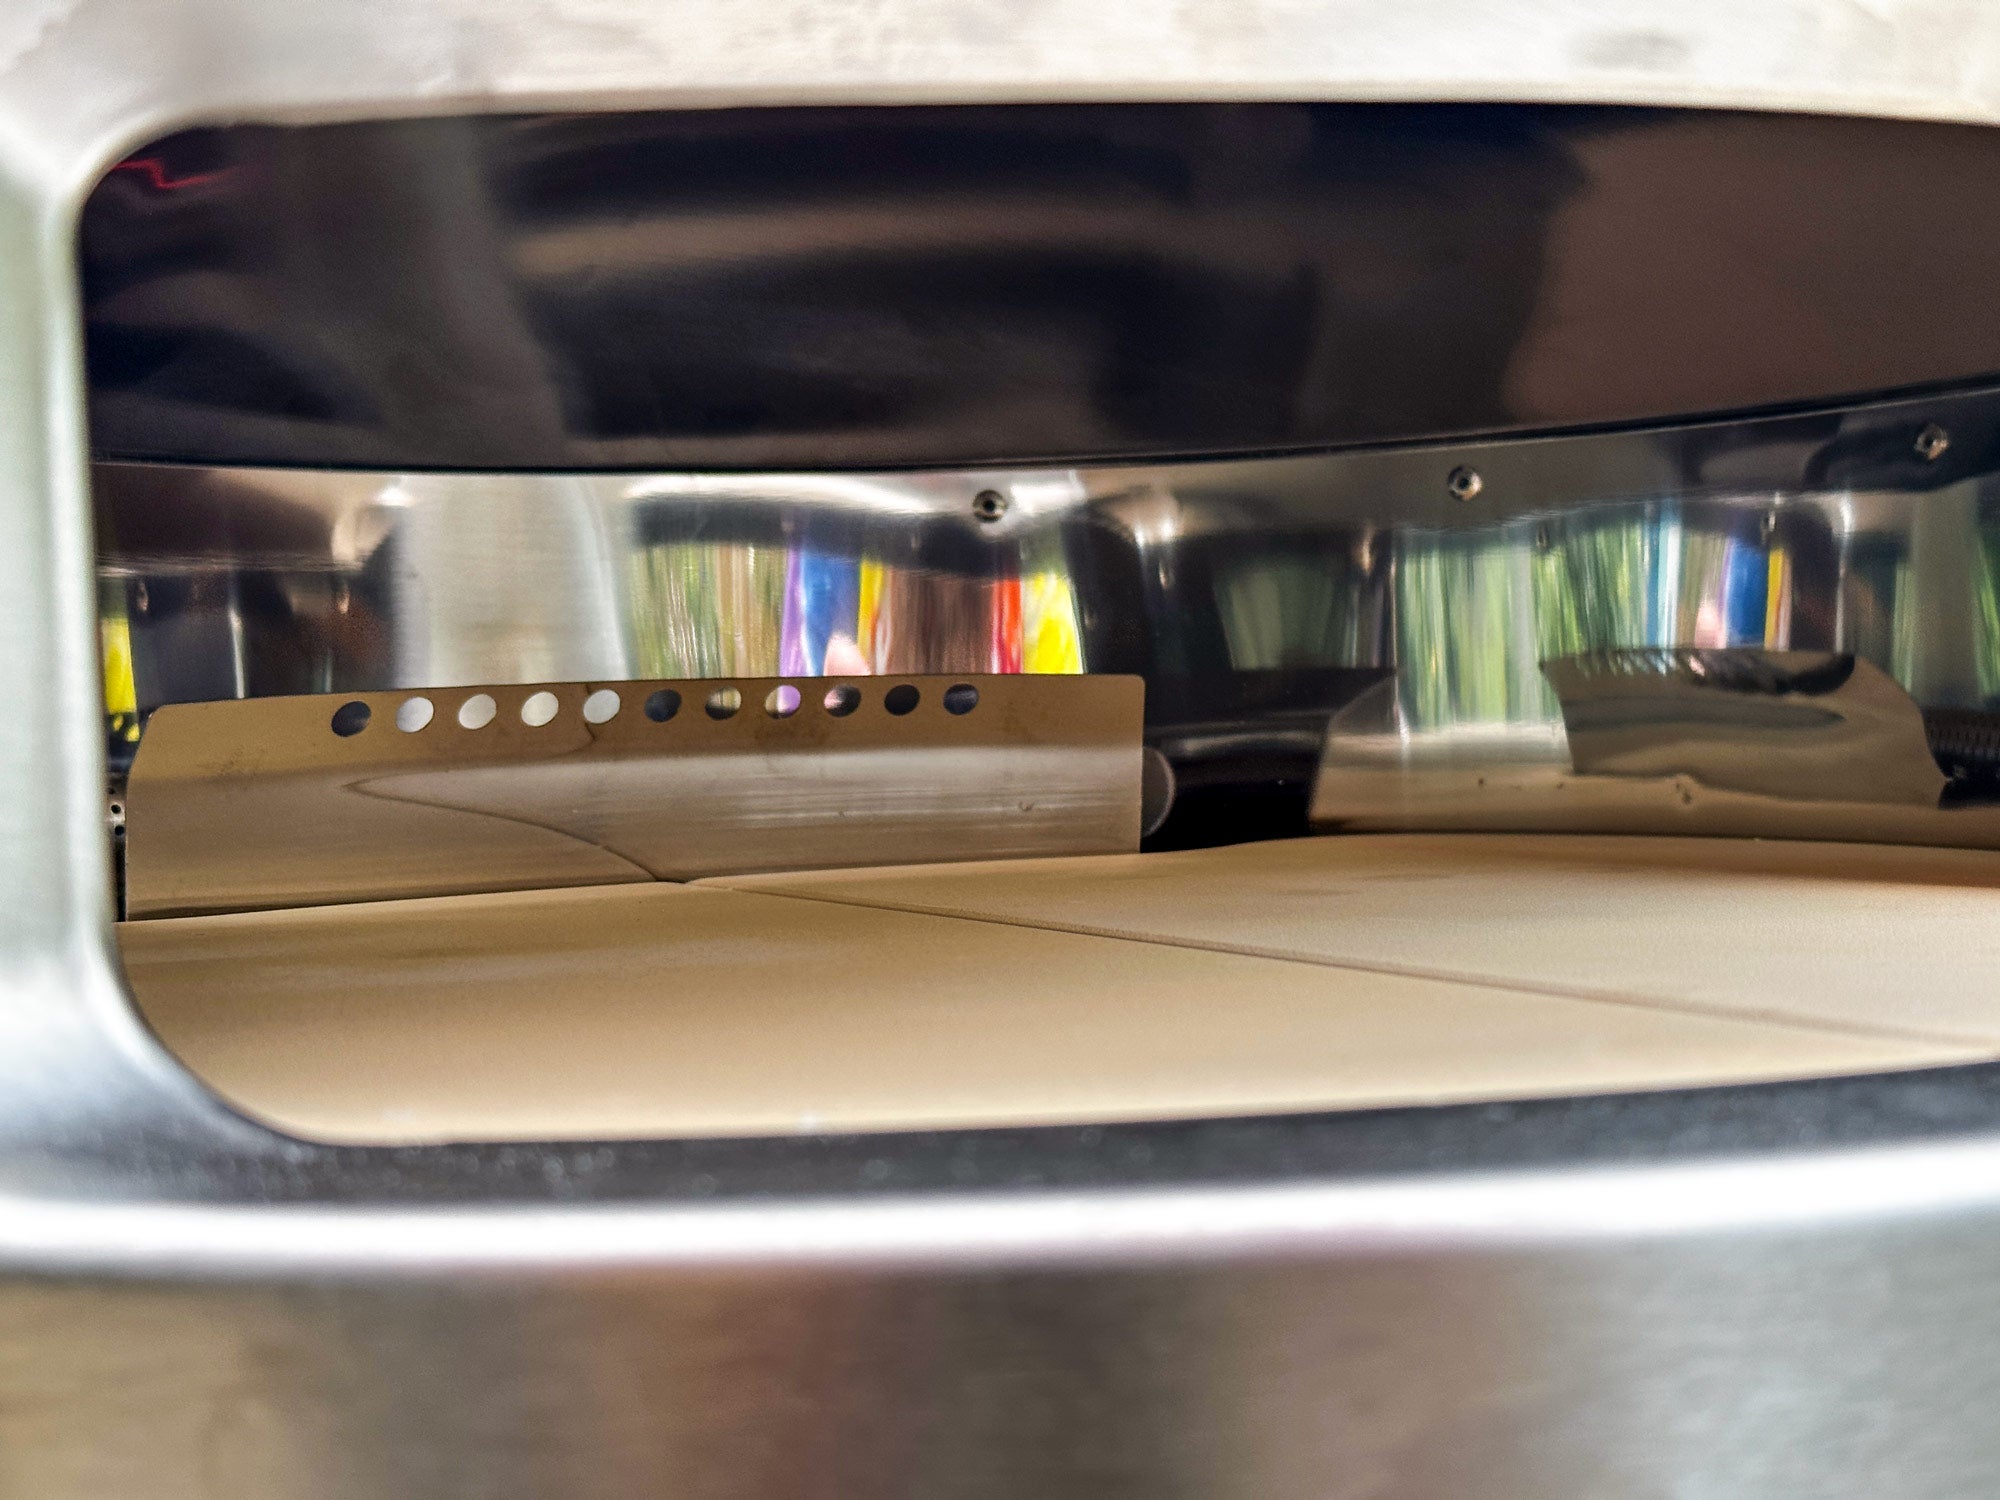 An internal look at the Pi Prime pizza oven